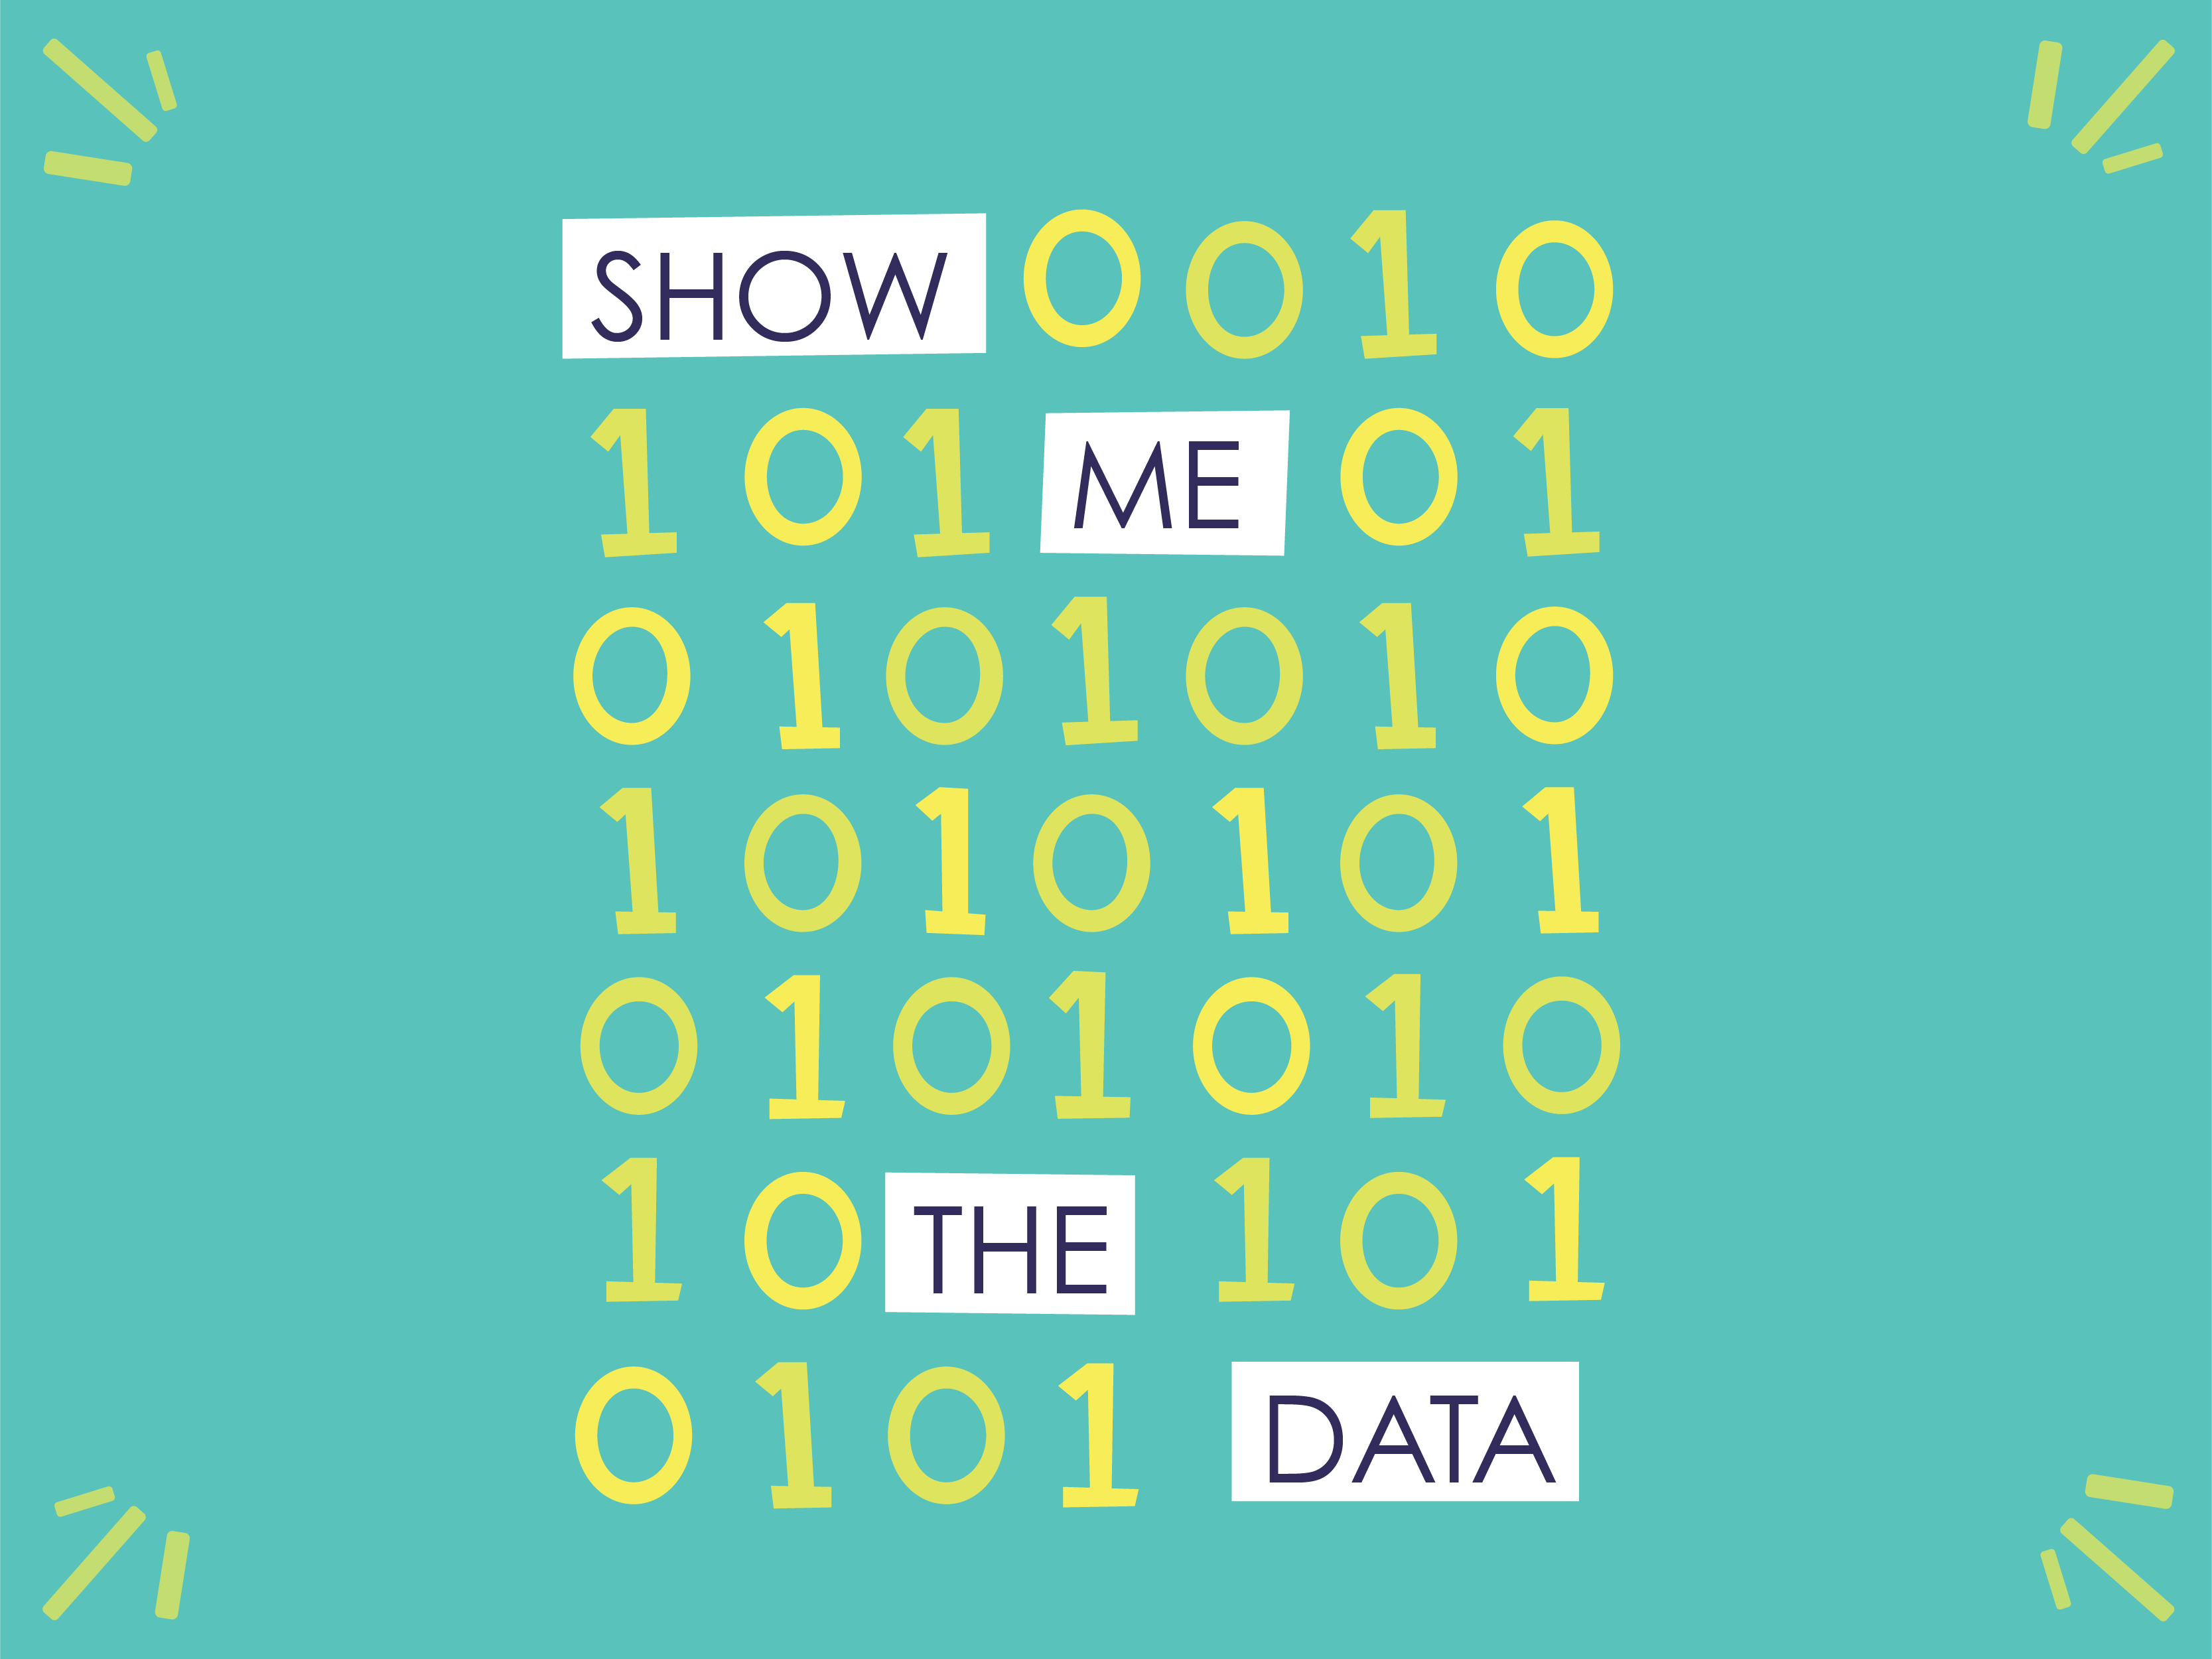 show-me-the-data-1-by-jen-beck-on-dribbble